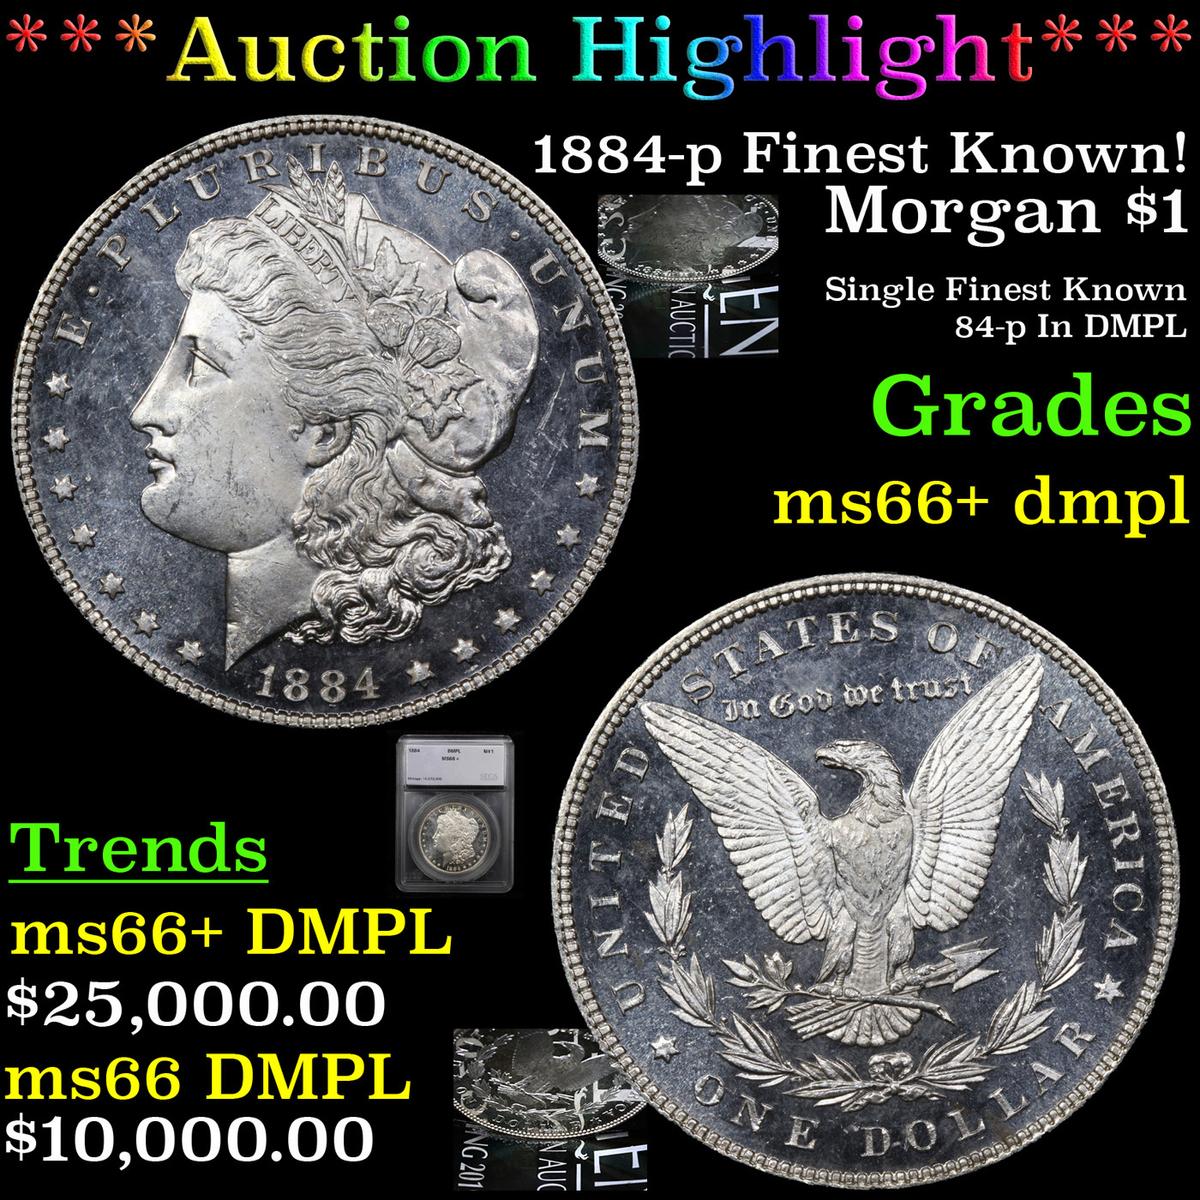 *HIGHLUGHT OF THE YEAR* 1884-p Finest Known! Morgan Dollar $1 Graded ms66+ dmpl By SEGS (fc)